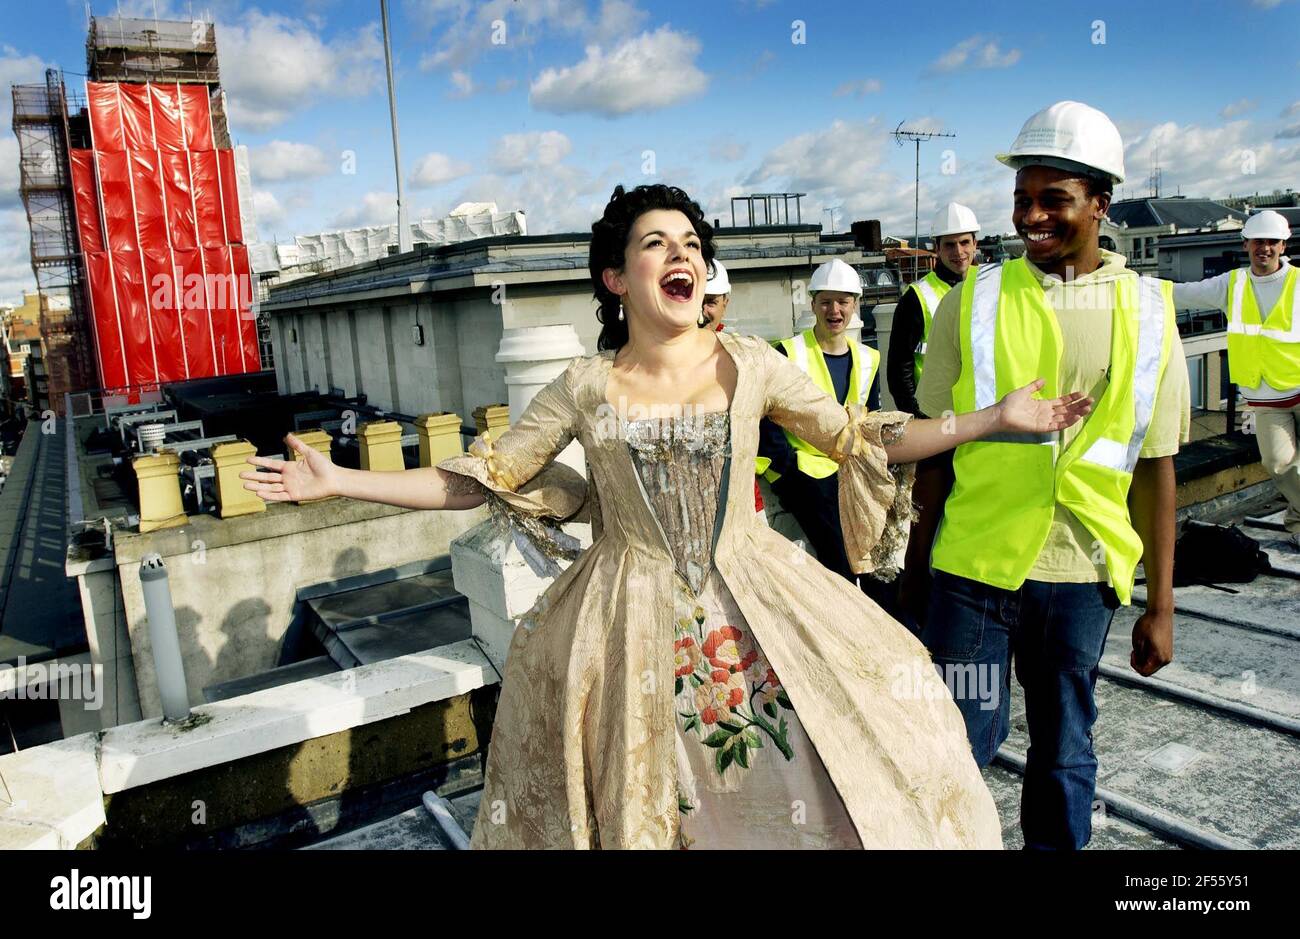 Victoria Simmonds, who will sing the principal role of Rosina in ENO's revival of 'The Barber of Seville', posing with construction workers on the rooftop of No. 6 St Martins Place with the on-going construction work of the Coliseum in the background. This stunt was in aid of promoting the launch of the 2002/3 ENO Season at the London Coliseum which opens on Thursday 24 October.23 October 2002 photo Andy Paradise Stock Photo